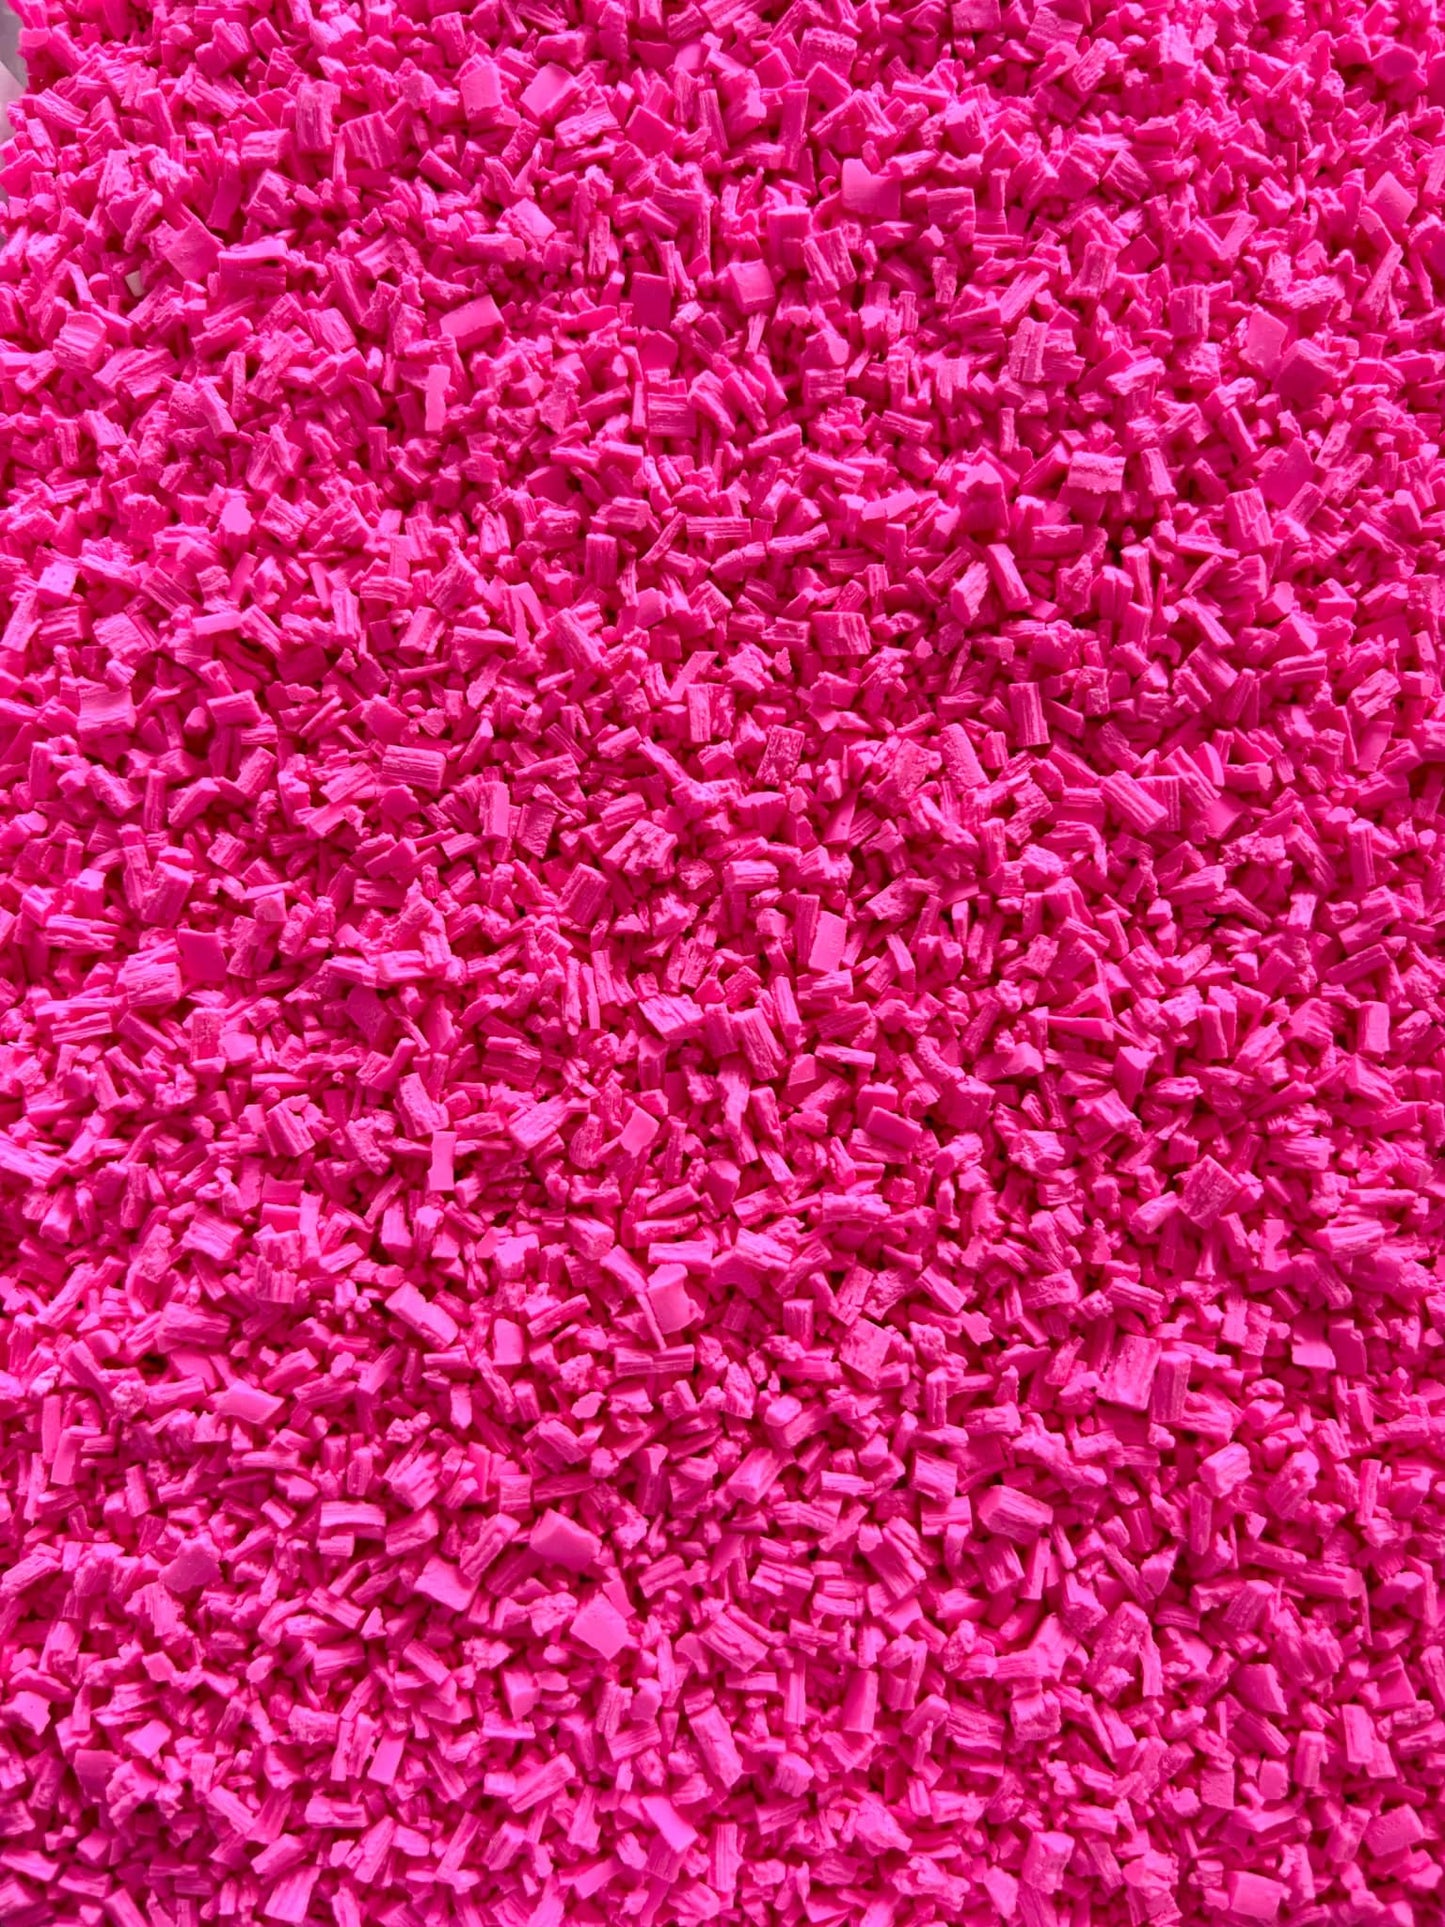 Hot Pink Clay Mix.